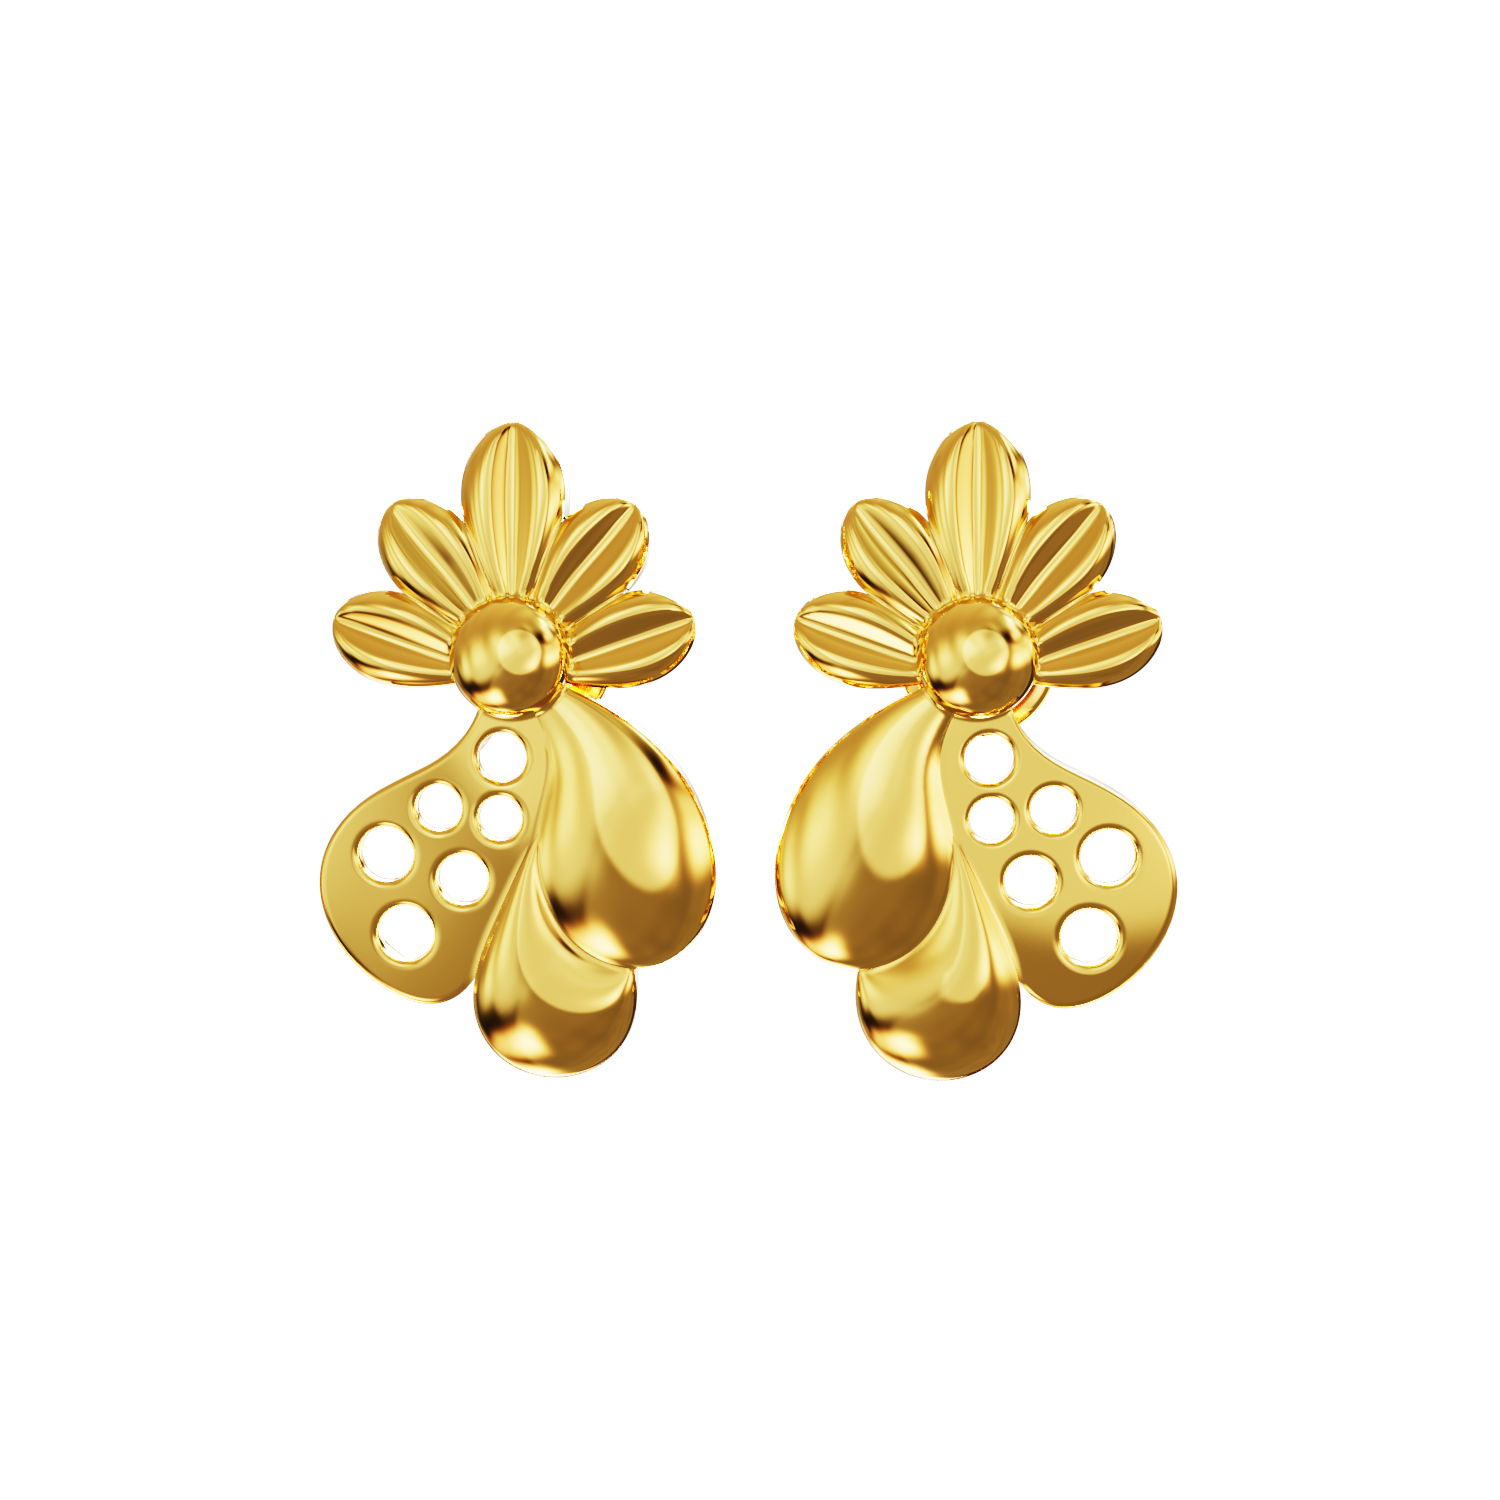 Latest Light Weight Gold Earrings Designs | Gold Jhumka,Hoop Earrings  Collections | Latest Light Weight Gold Earrings Designs | Gold Jhumka Hoop  Earrings Collections #golddroplongearrings #goldEarringsdesigns #pinjada  jhumka Latest... | By Lifestyle ...